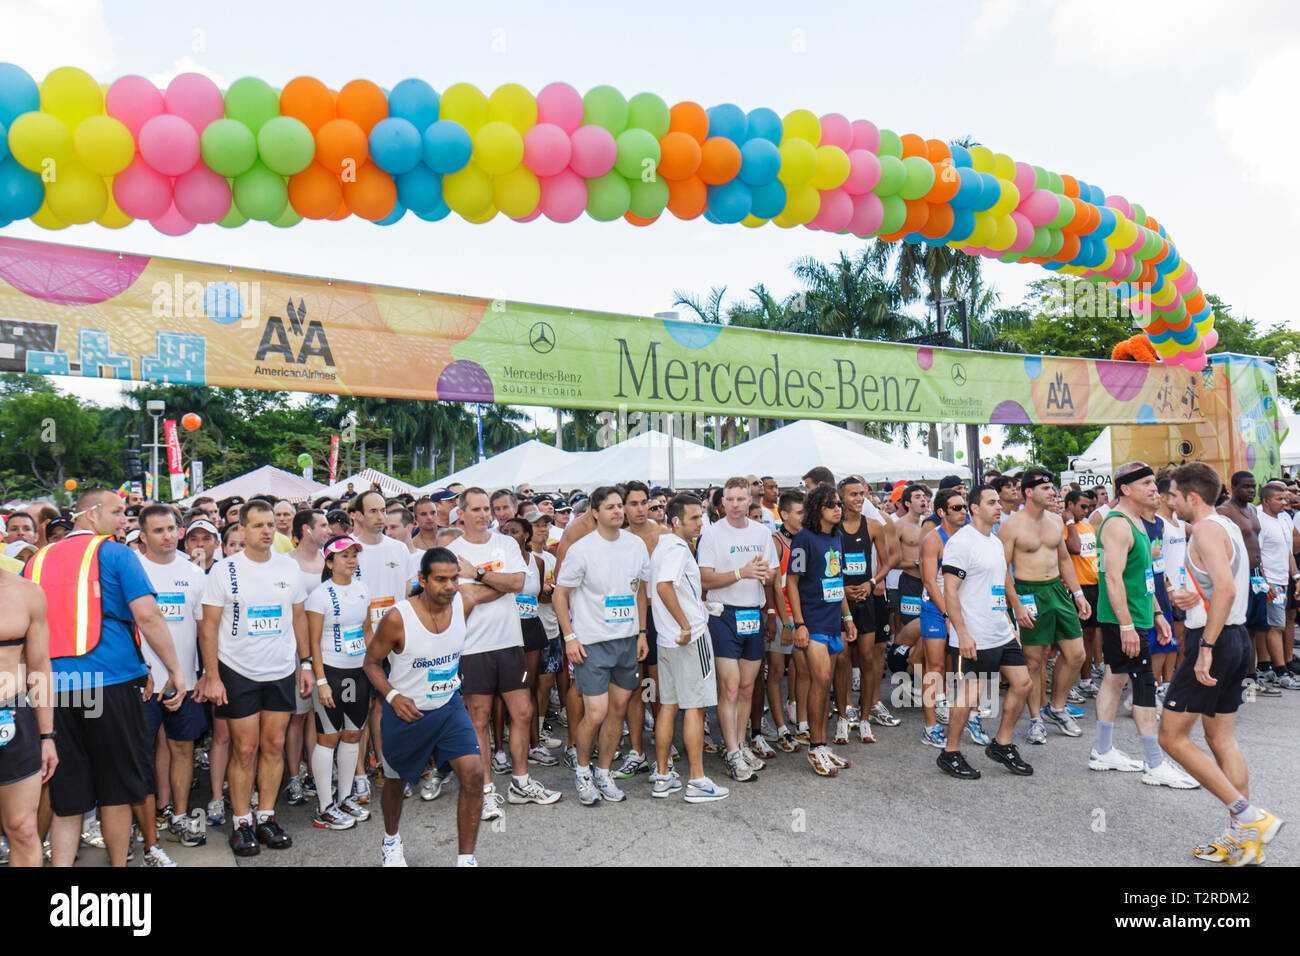 Miami Florida,Bayfront Park,Mercedes Benz Miami Corporate Run,race,community charity runners,employee worker workers working staff,co workers,starting Stock Photo